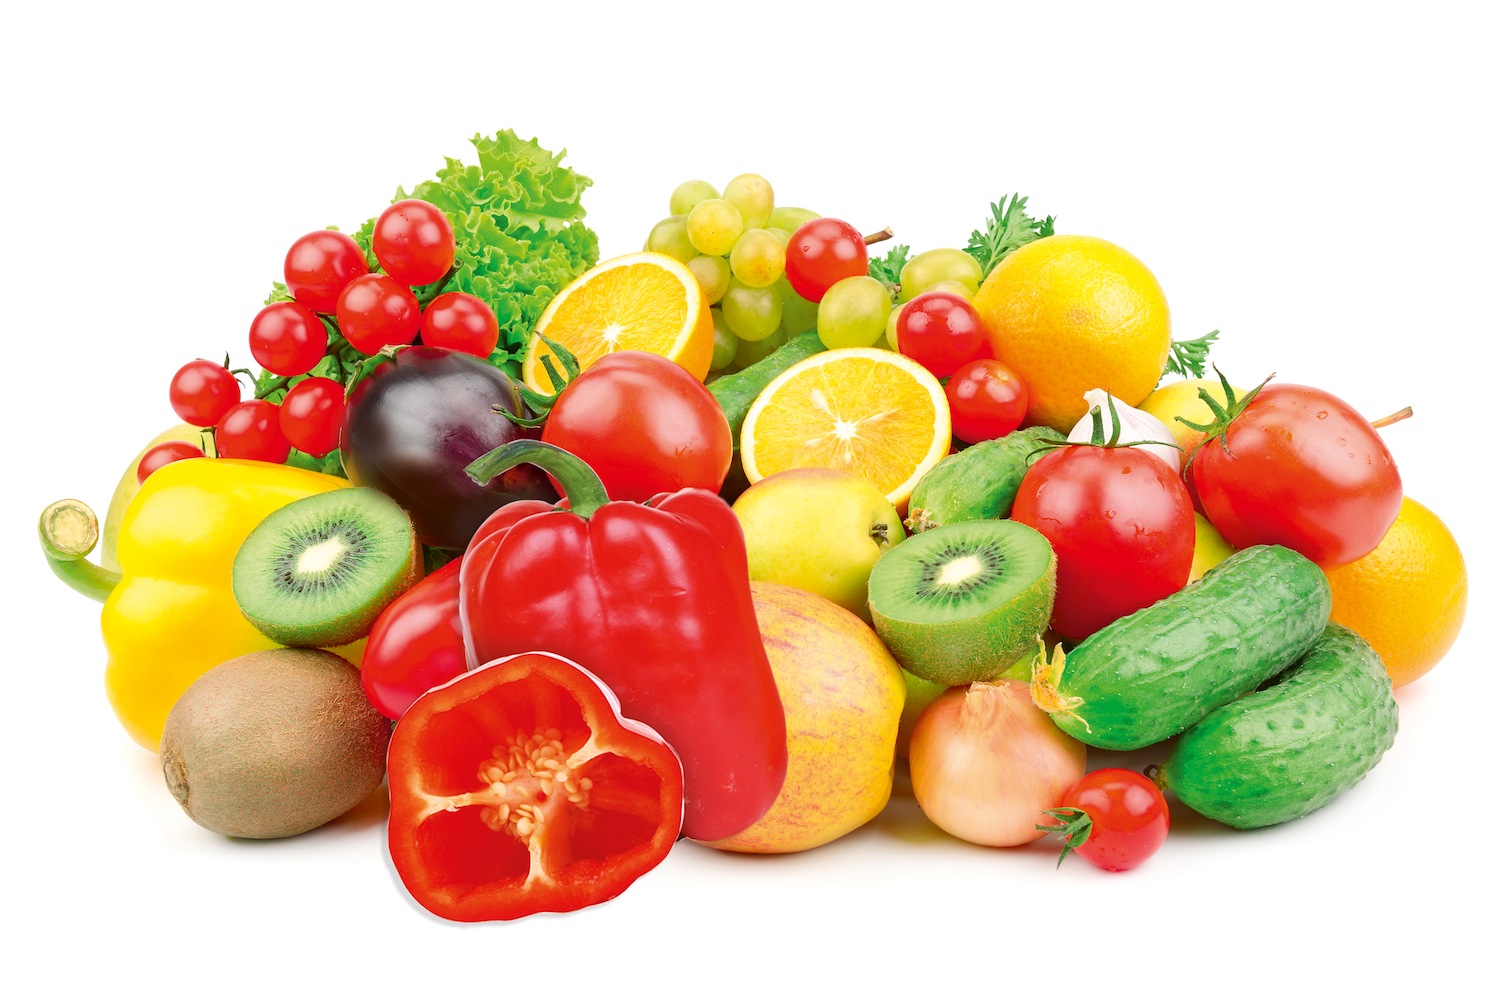 fruits and vegetables